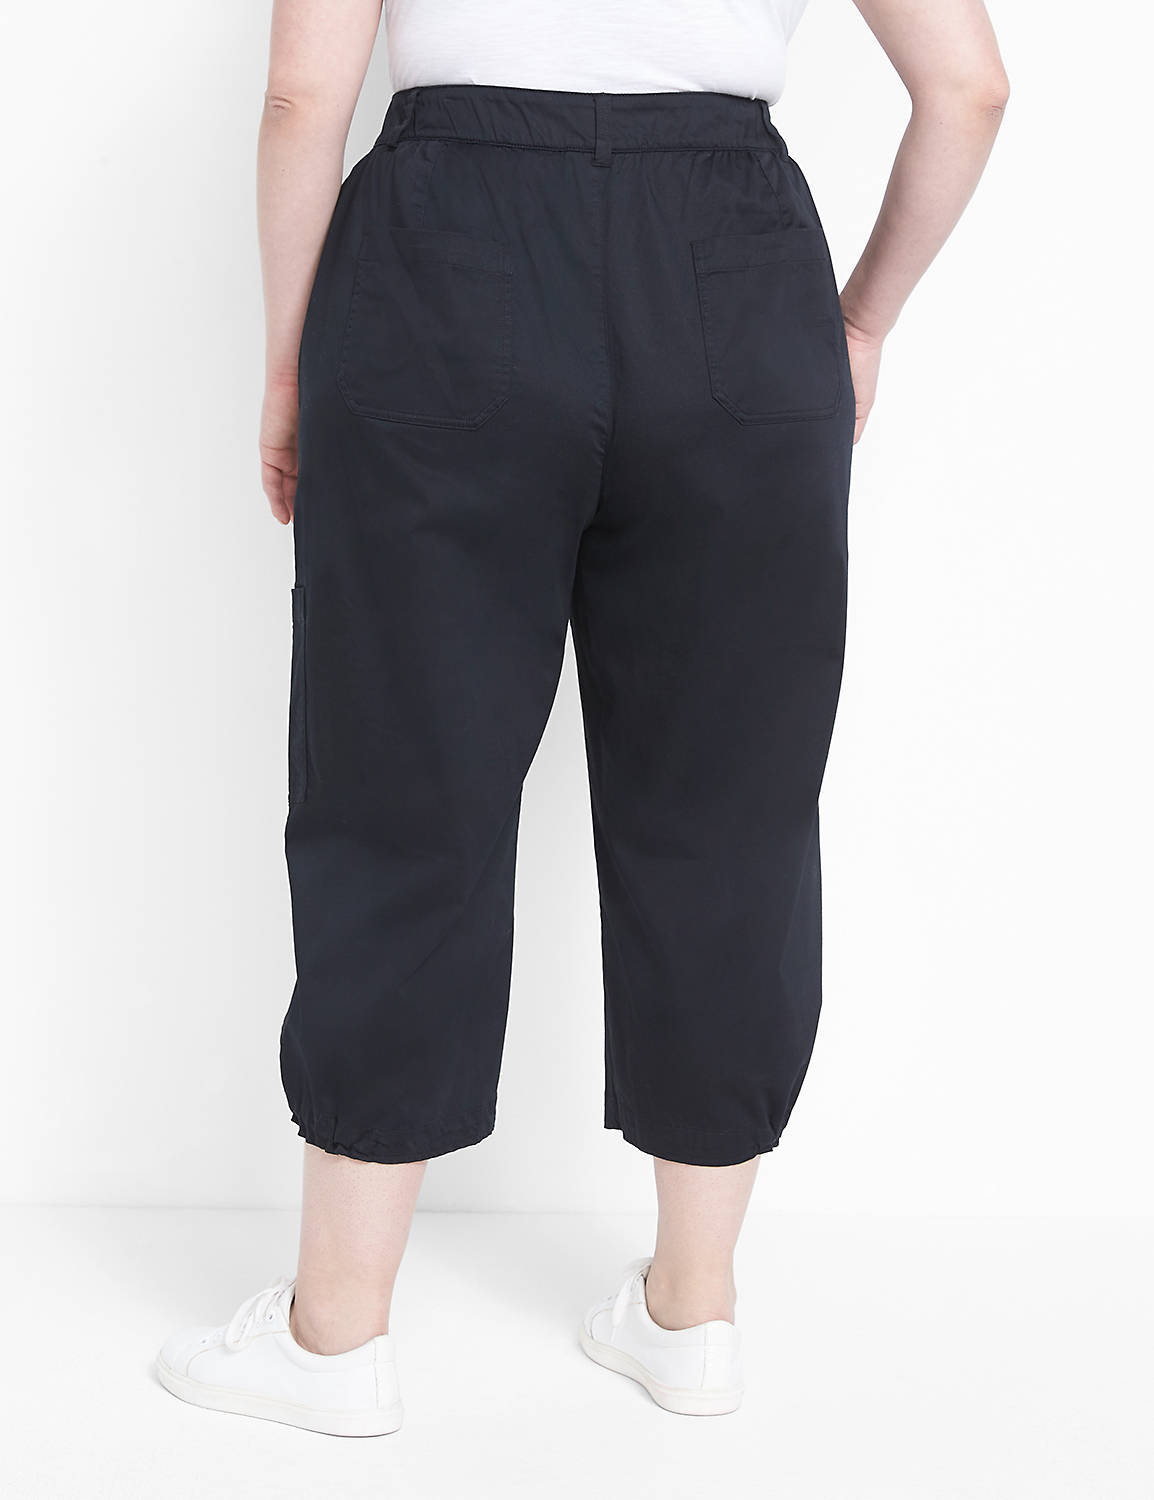 Soften Sateen Jogger 1125361 Product Image 2